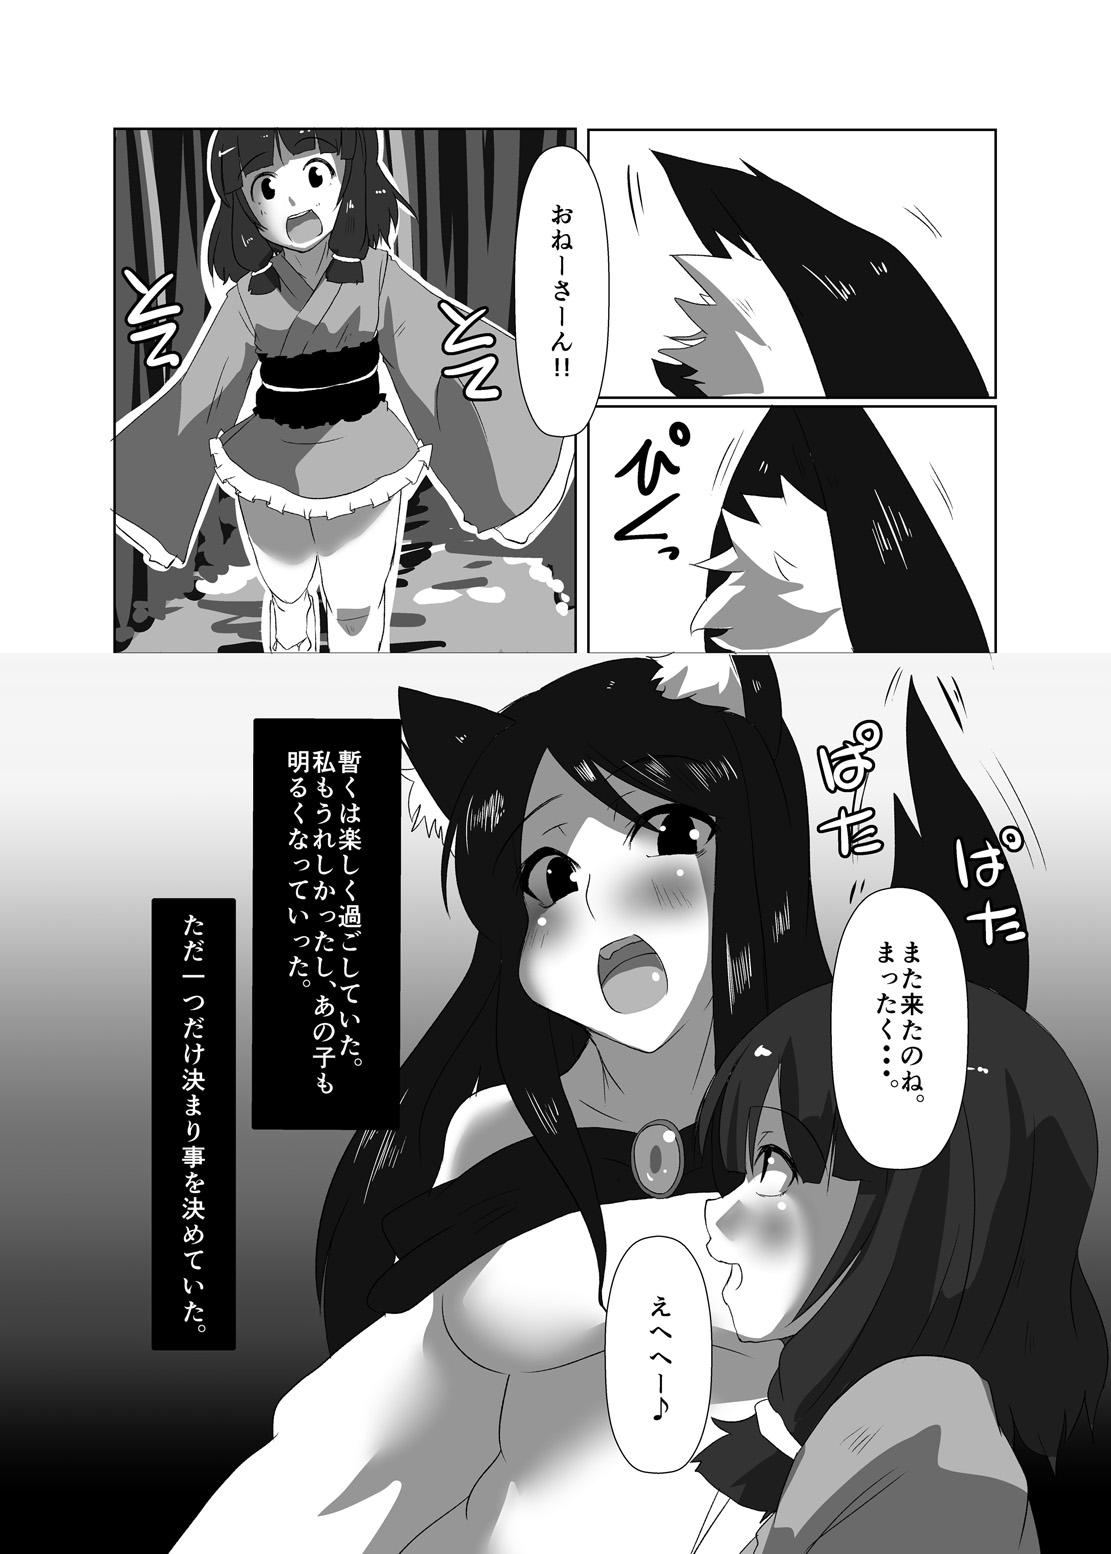 Hugecock ELonely Wolf no Onee-san - Touhou project Cum - Page 12